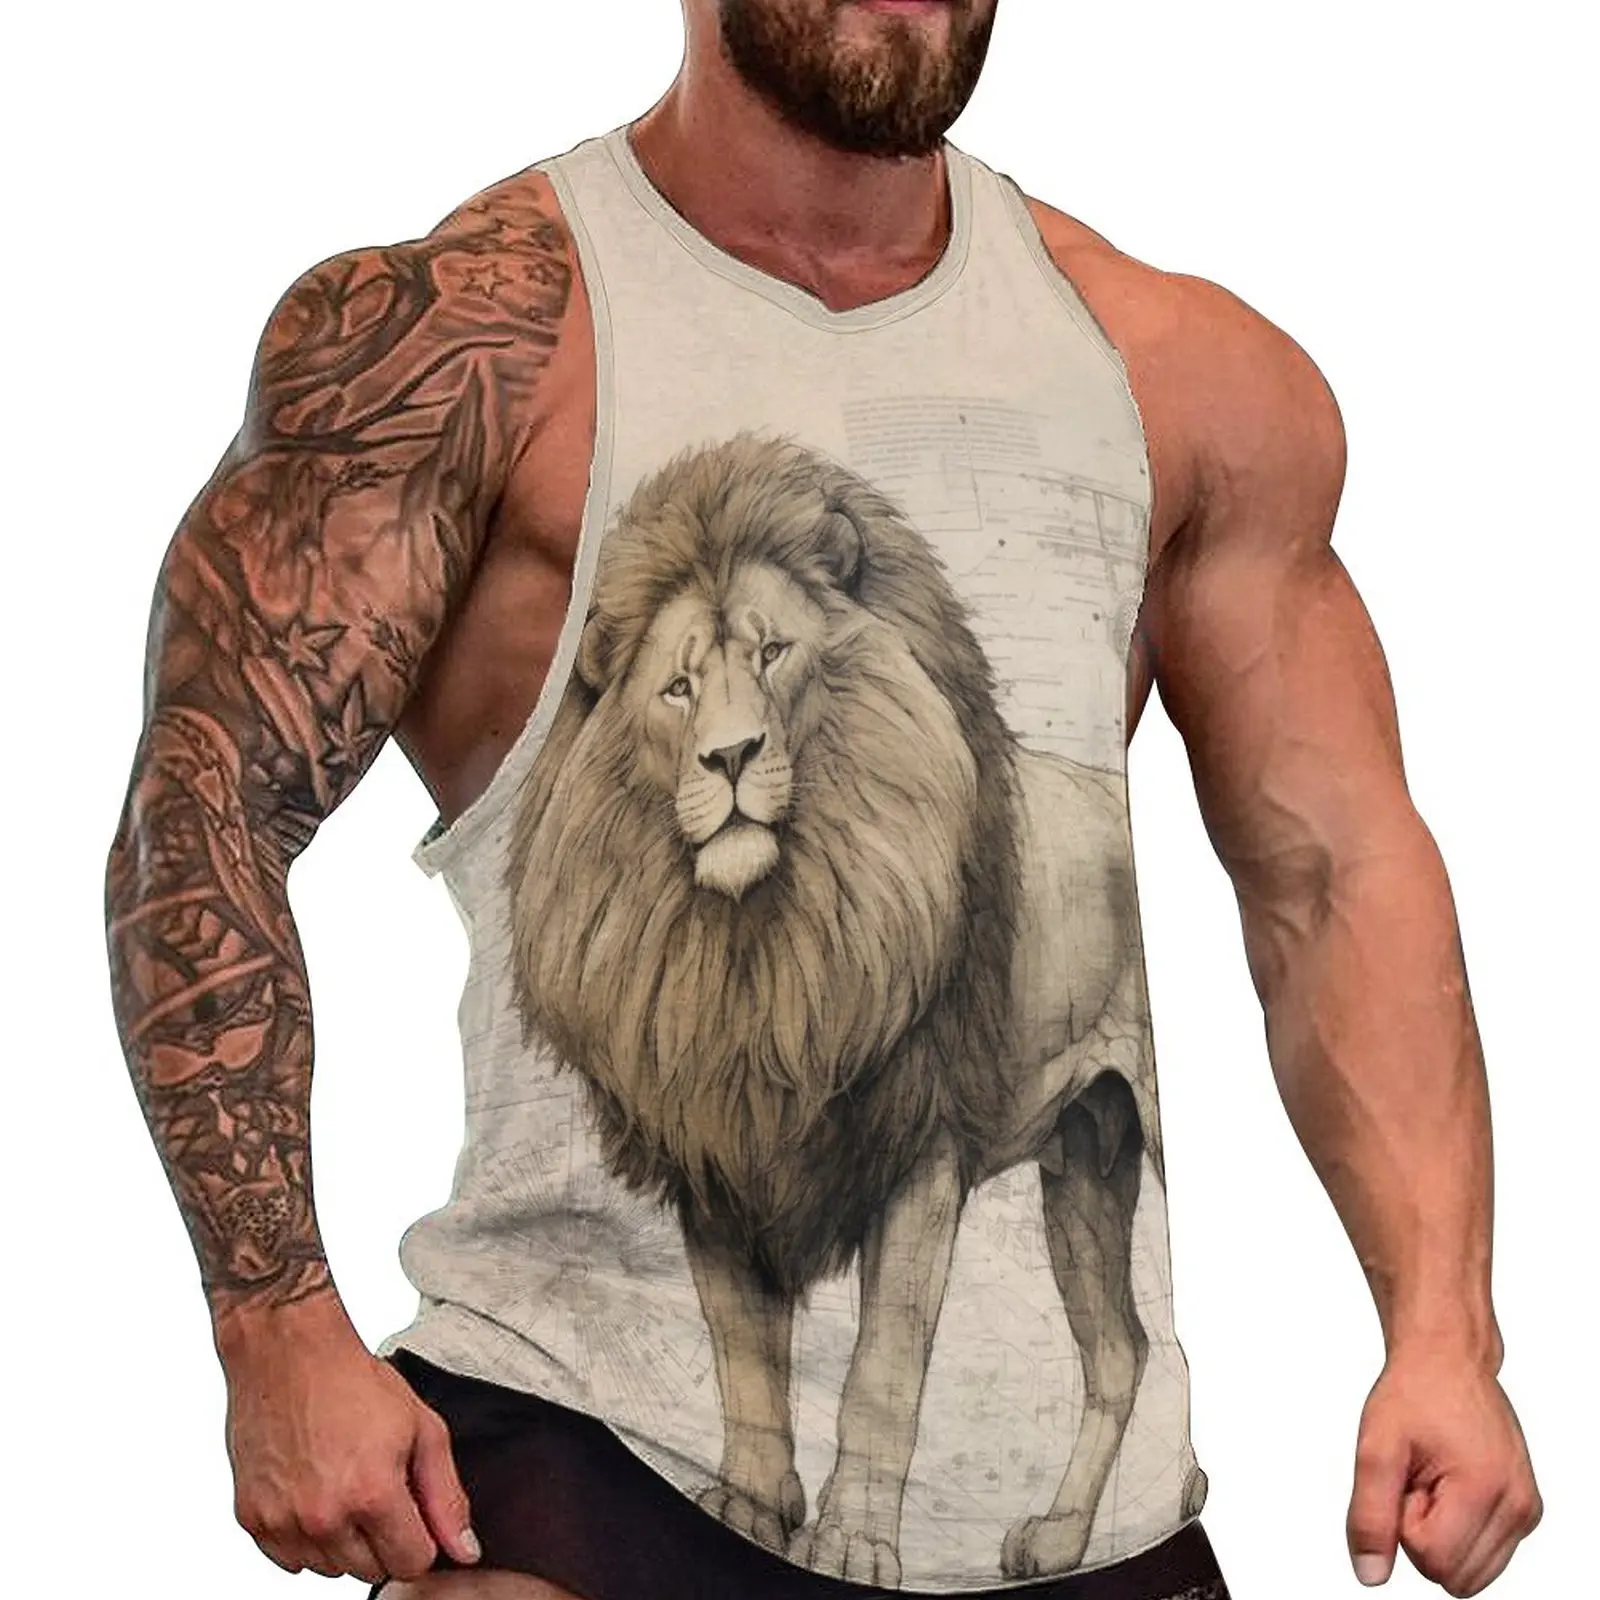 

Lion Tank Top Man's High Detail Pencil Drawing Bodybuilding Oversized Tops Summer Cool Graphic Sleeveless Shirts